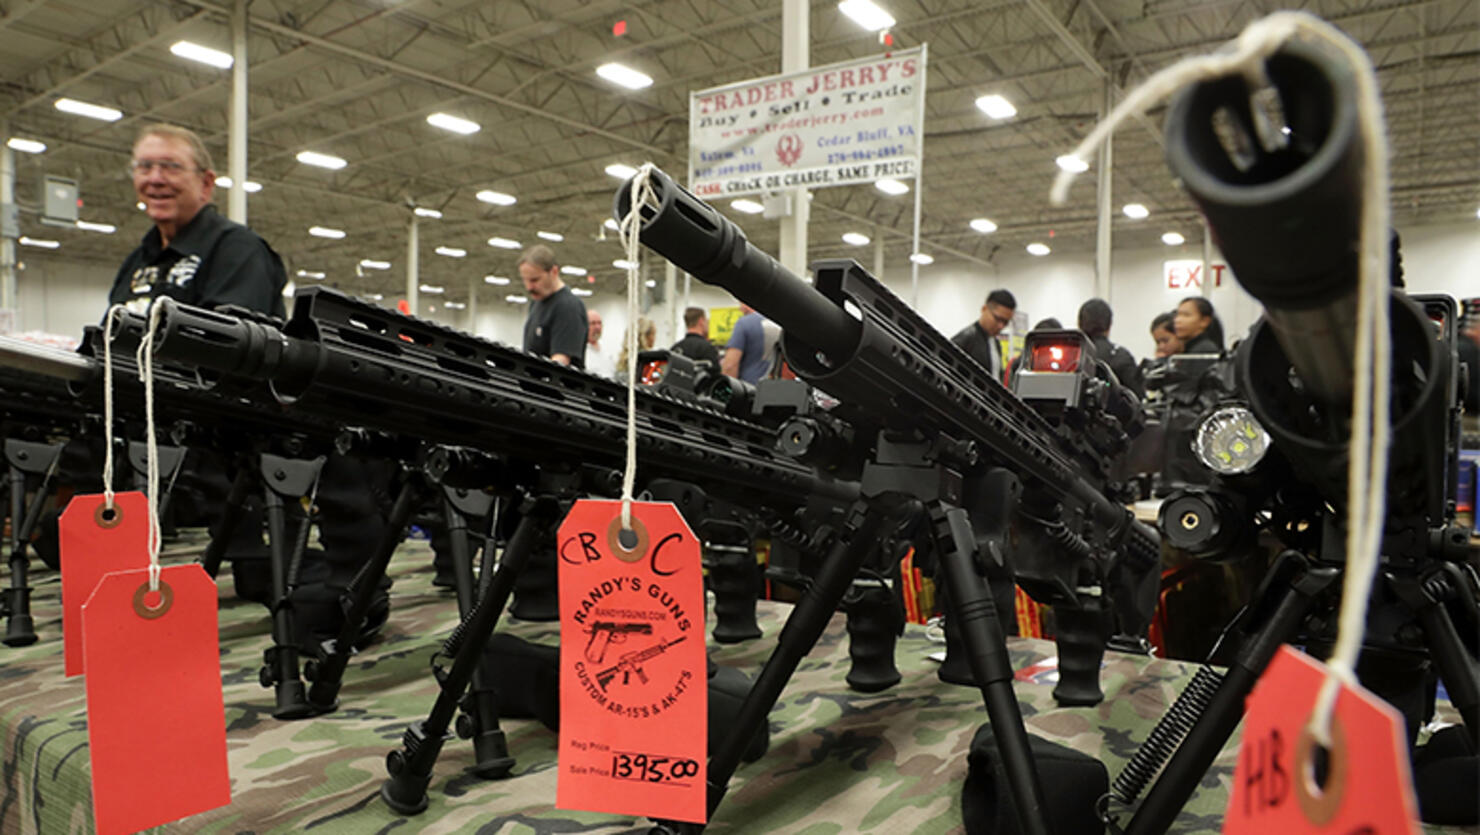 AR-15 rifles are on display during the Nation's Gun Show